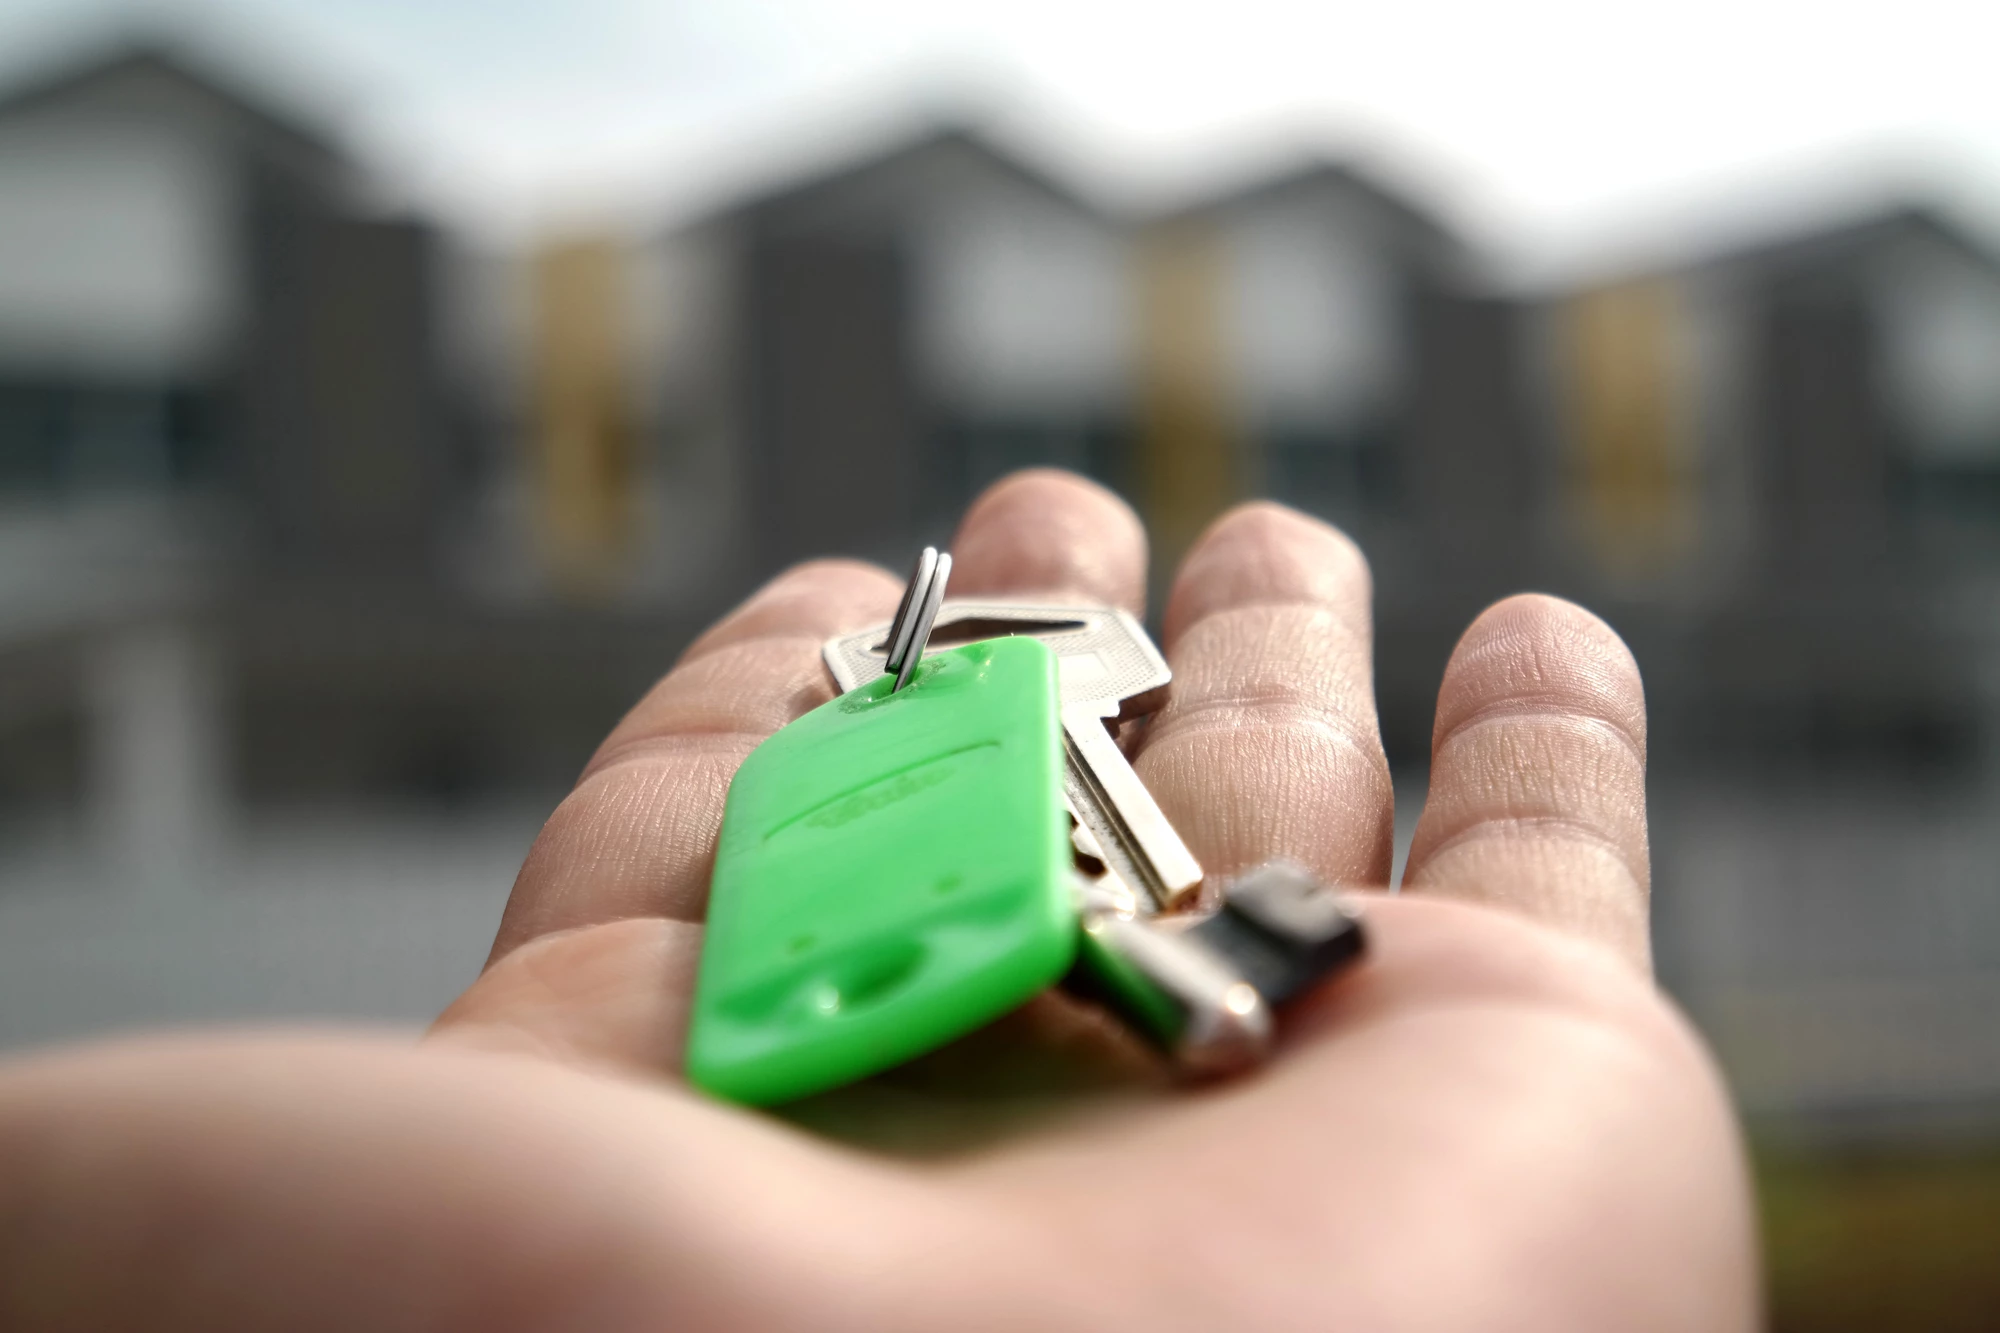 A key on a hand with buildings in the background